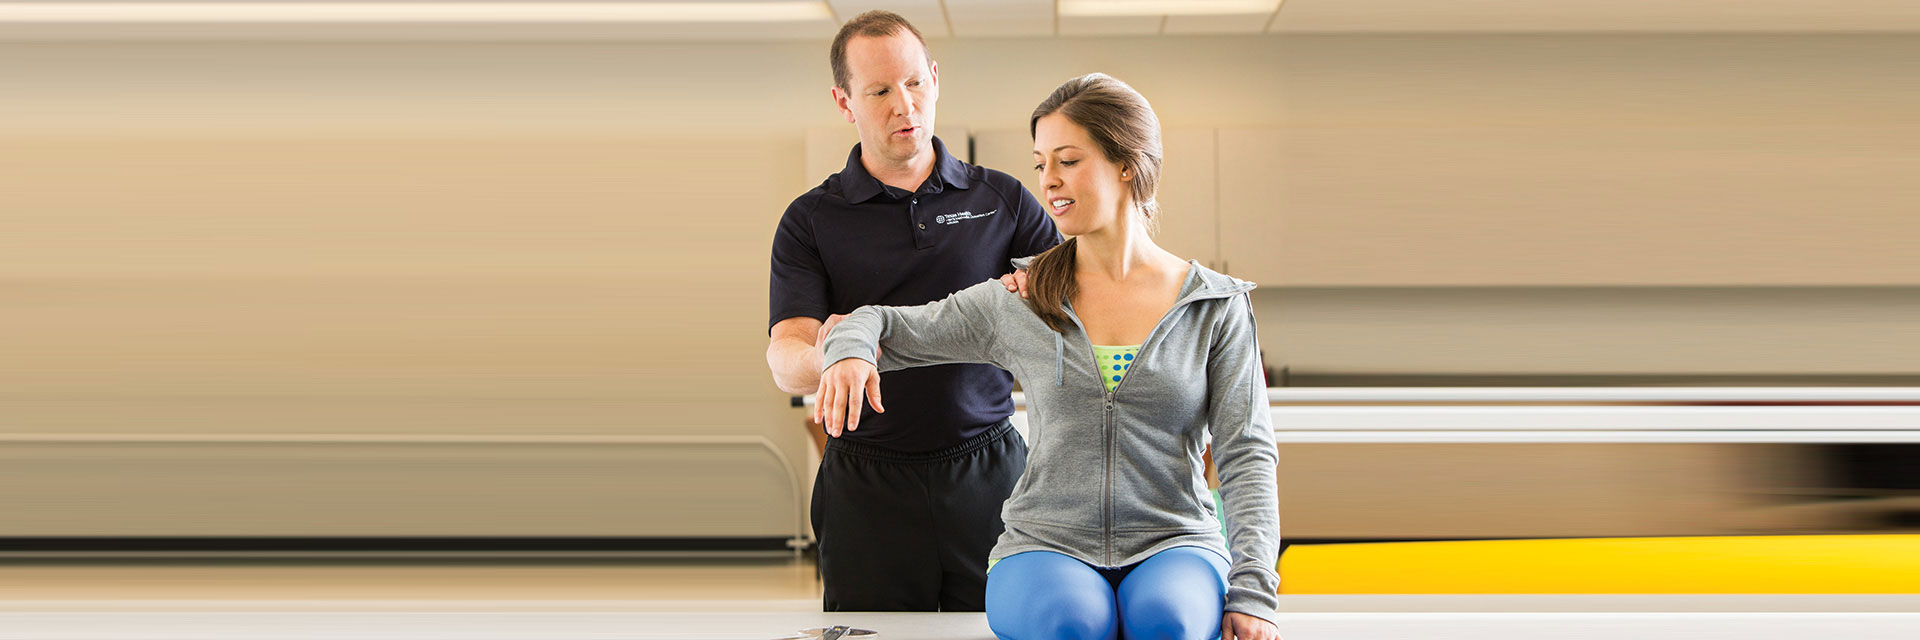 Physical Therapist with Patients